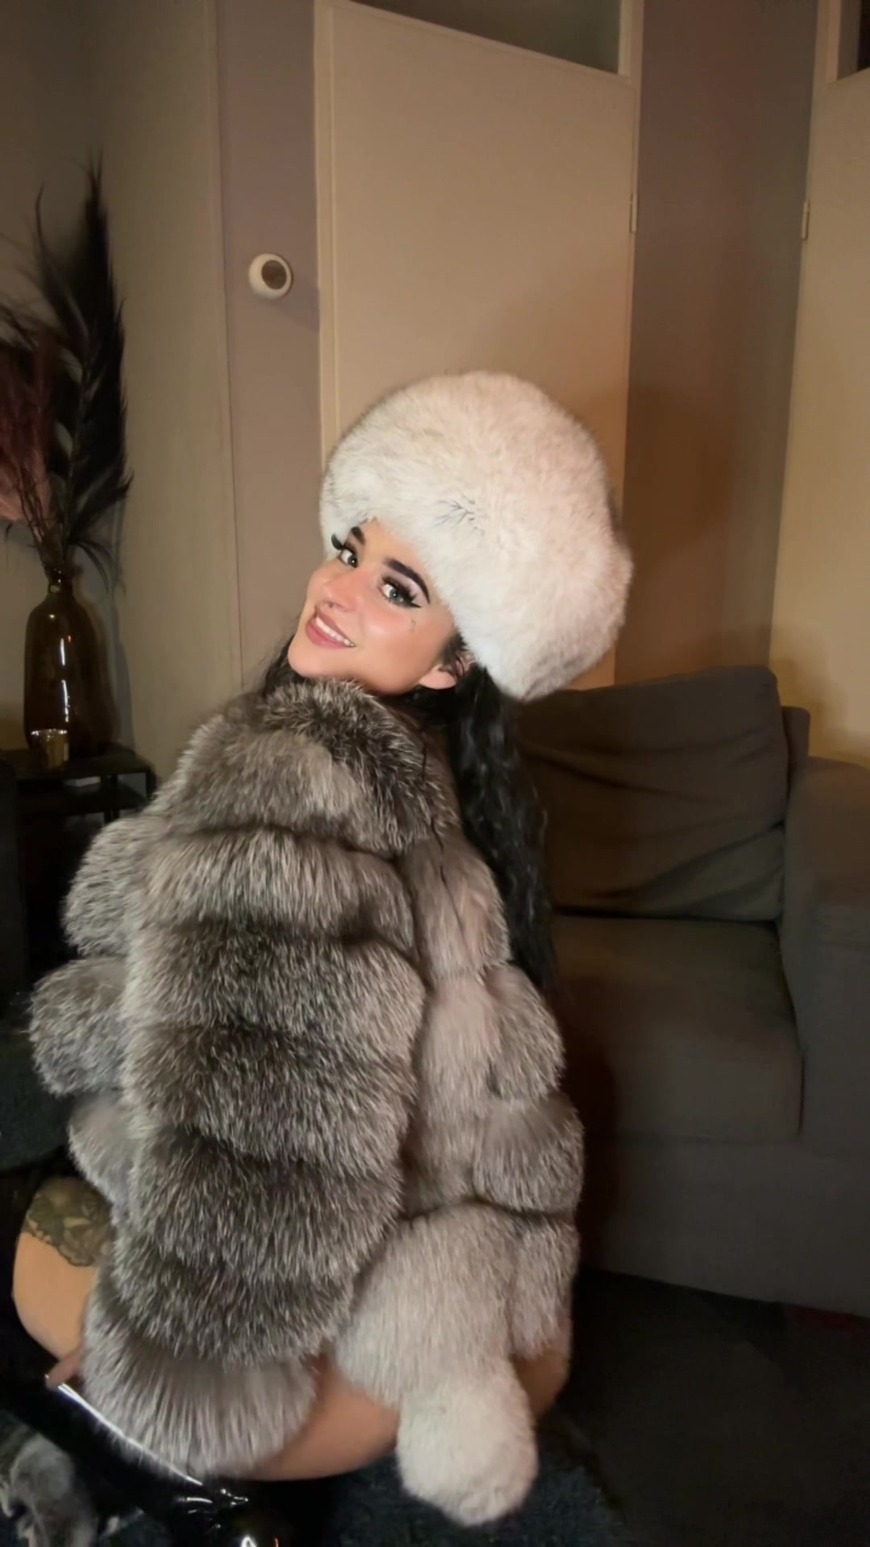 Fur Boy Tease 2 ( SPH / JOI / TEASE ) - clip coverforeground